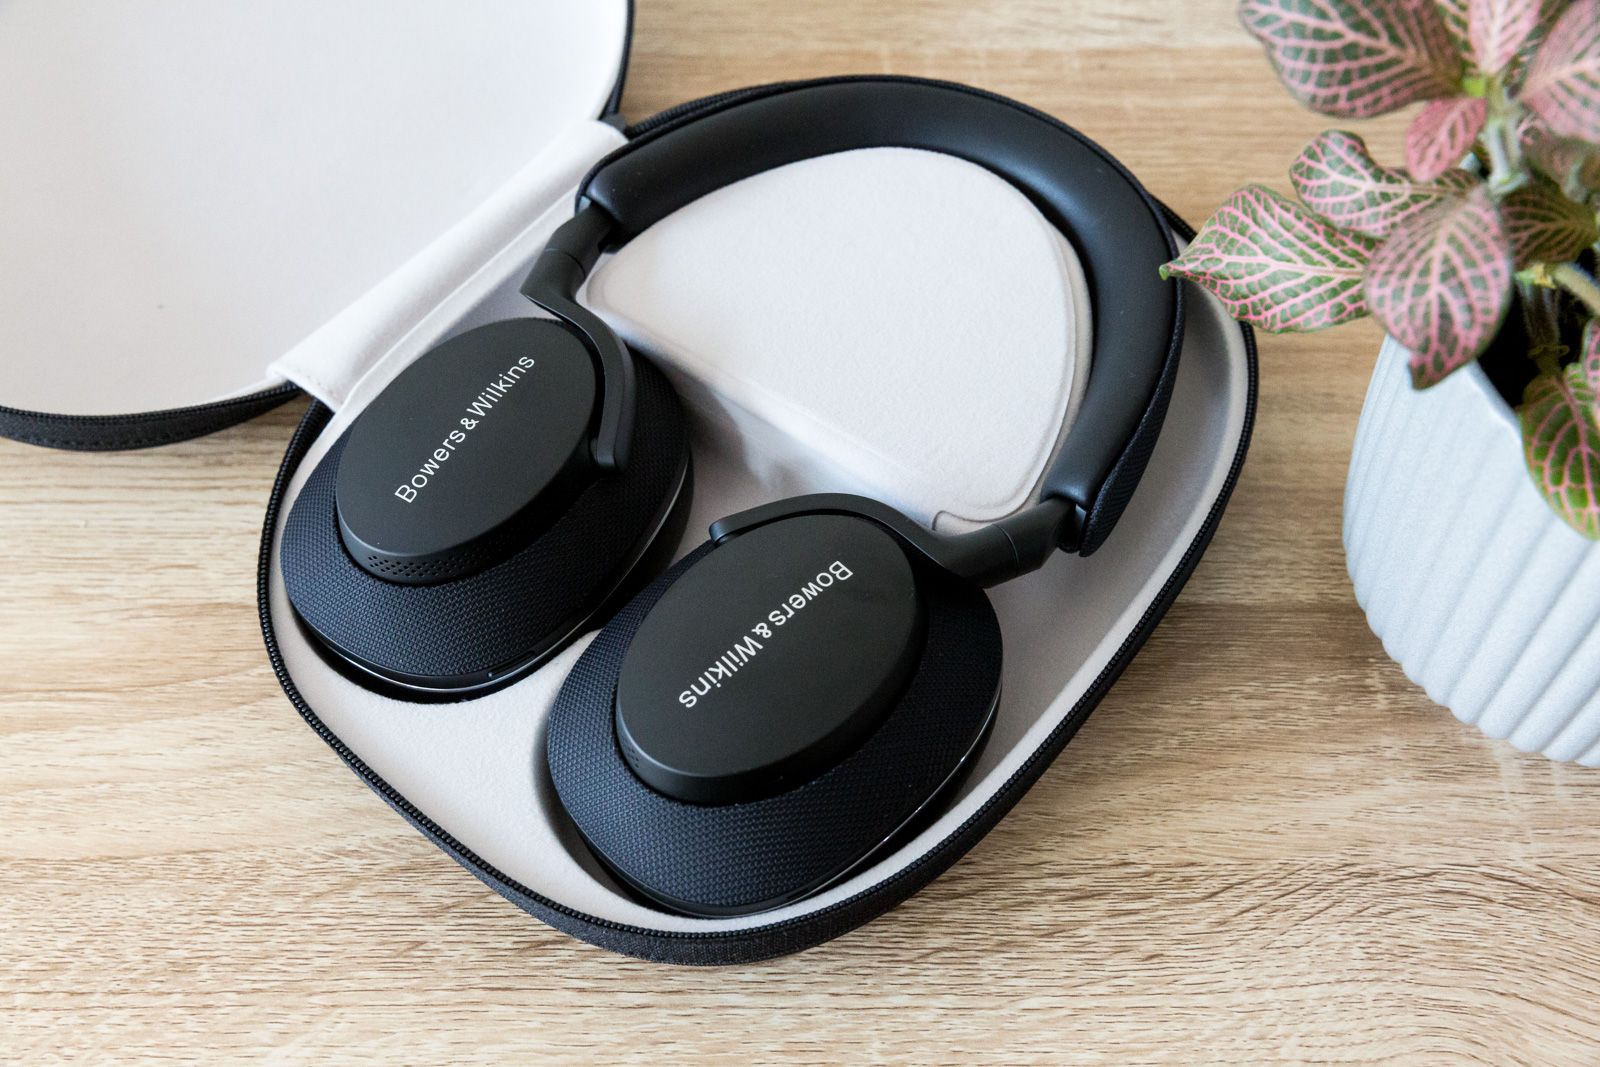 EE Pocket-lint Awards 2022: Best Headphones of the year photo 2